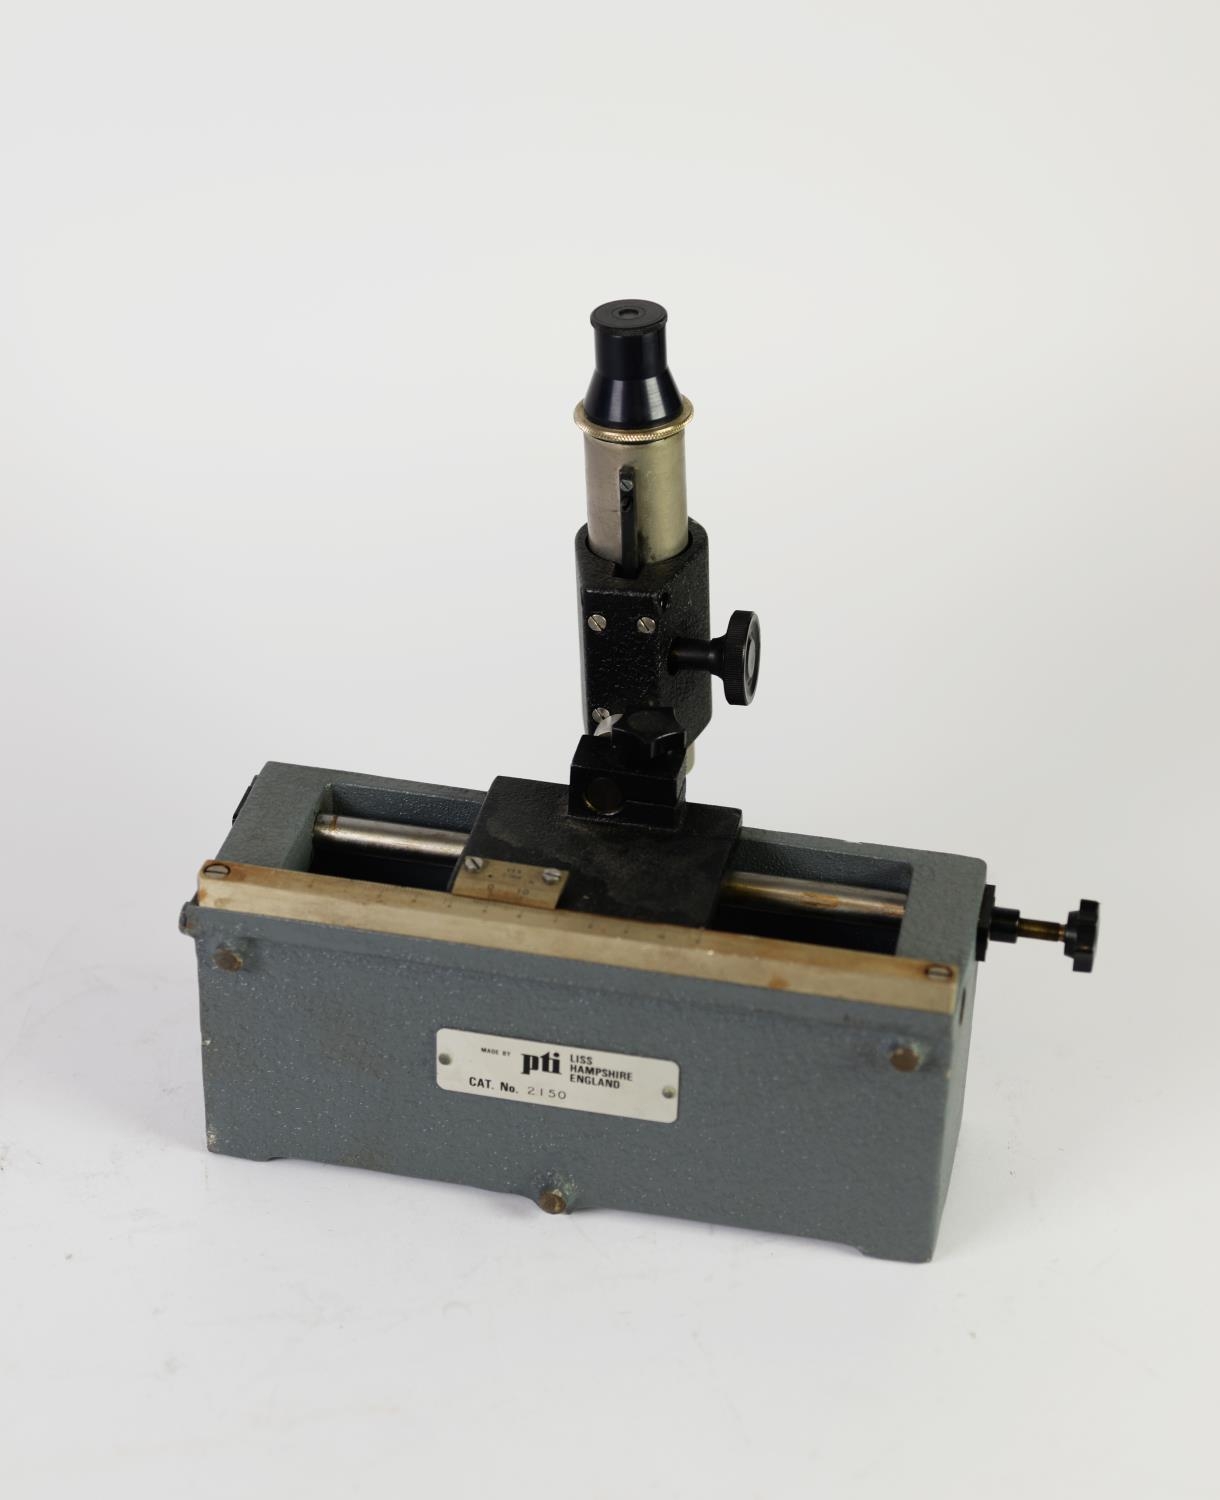 P.T.I LISS HAMPSHIRE TRAVELLING VERNIER MICROSCOPE, Cat No. 2150, 10" (25.5cm) wide